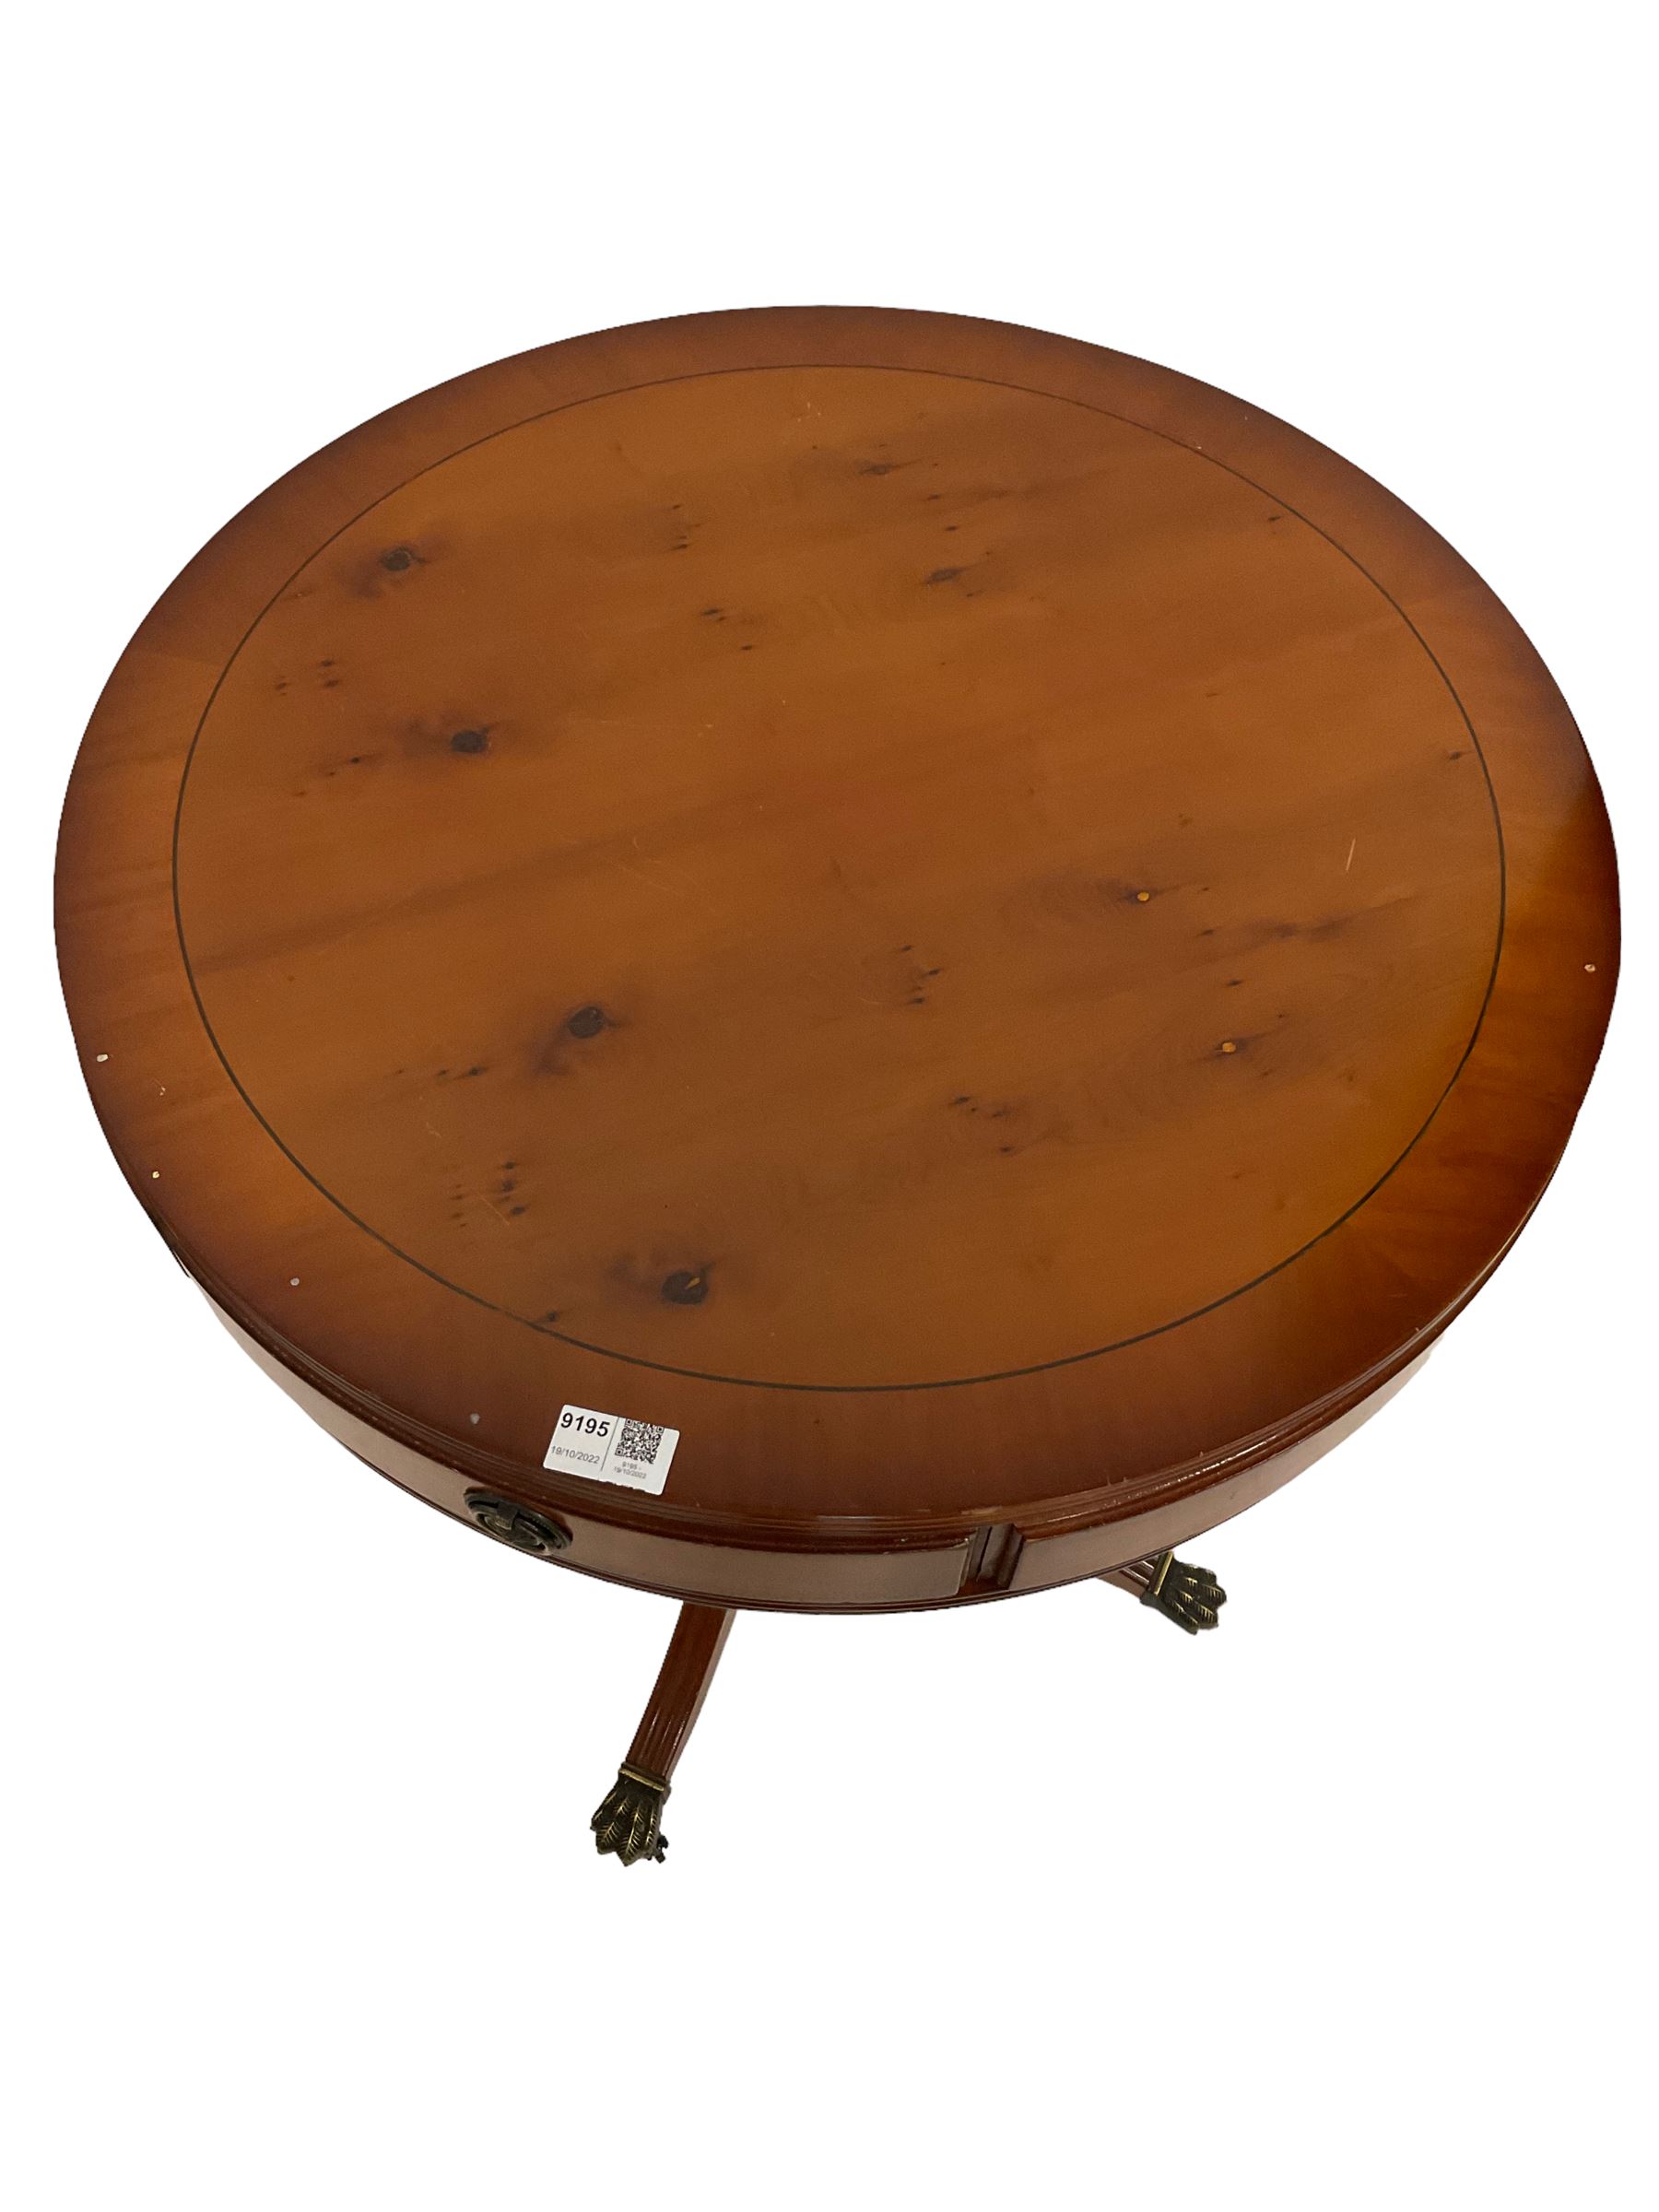 Yew wood drum table - Image 2 of 2